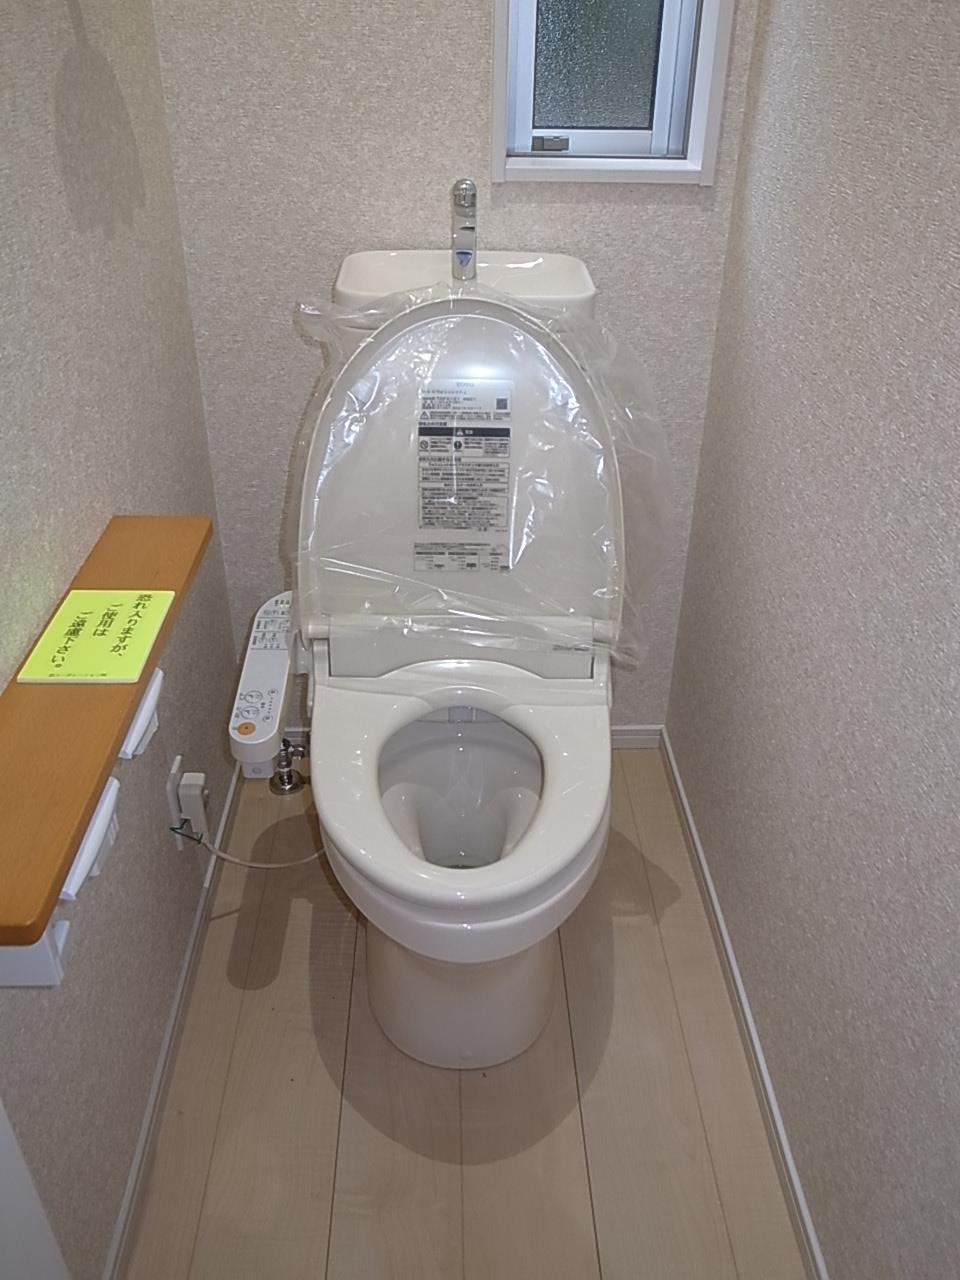 Toilet. Winter warm hot water cleaning function lid will open and close automatically ☆